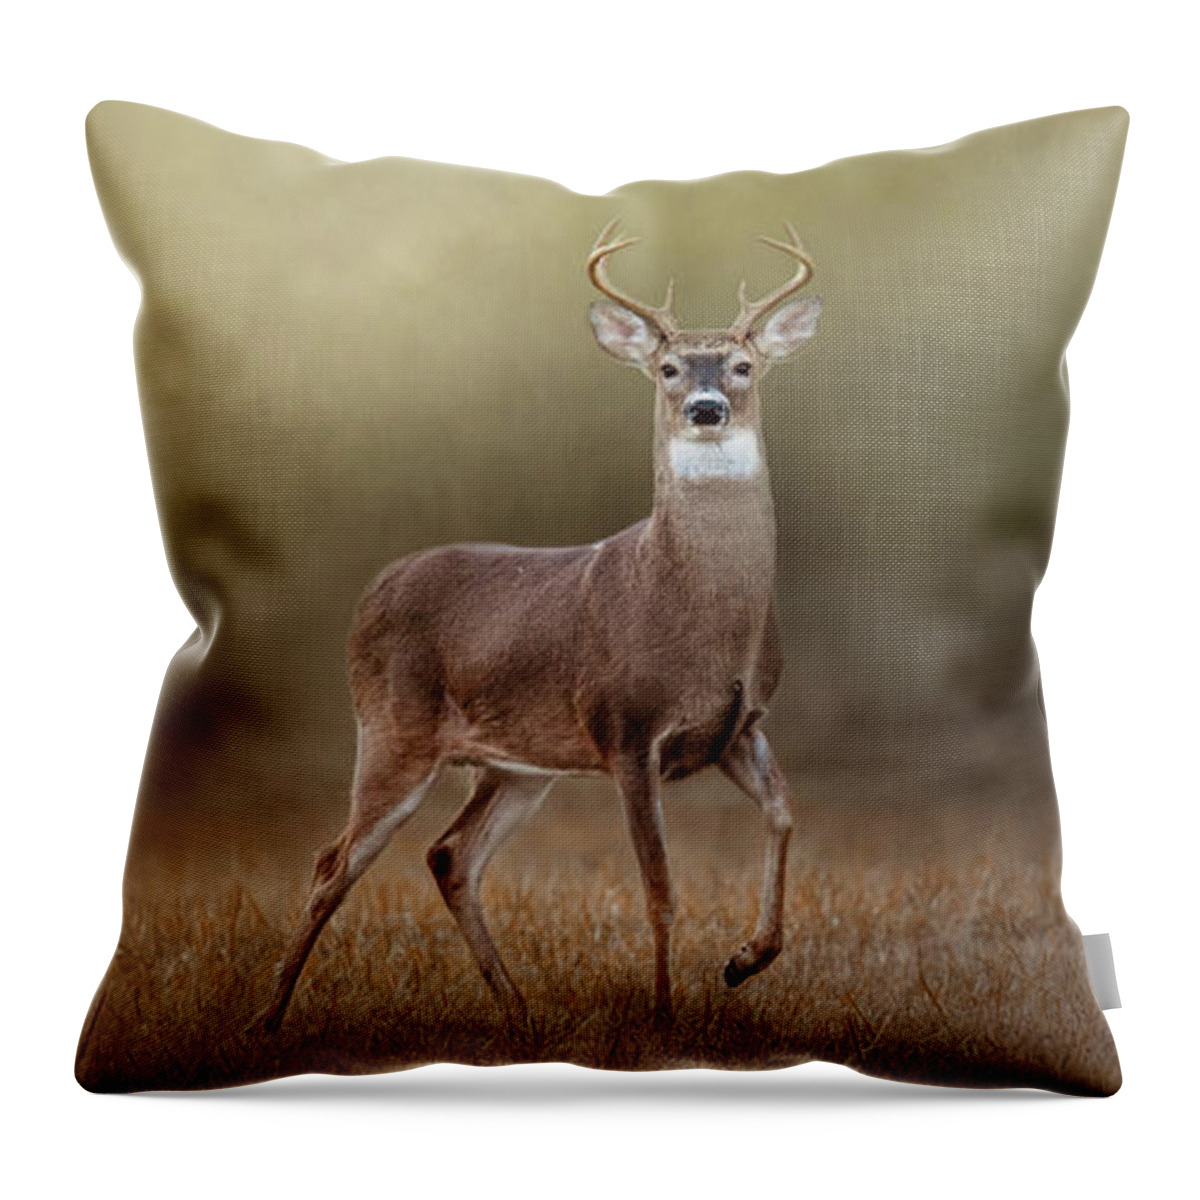 Deer Throw Pillow featuring the photograph Stepping Out by Jai Johnson